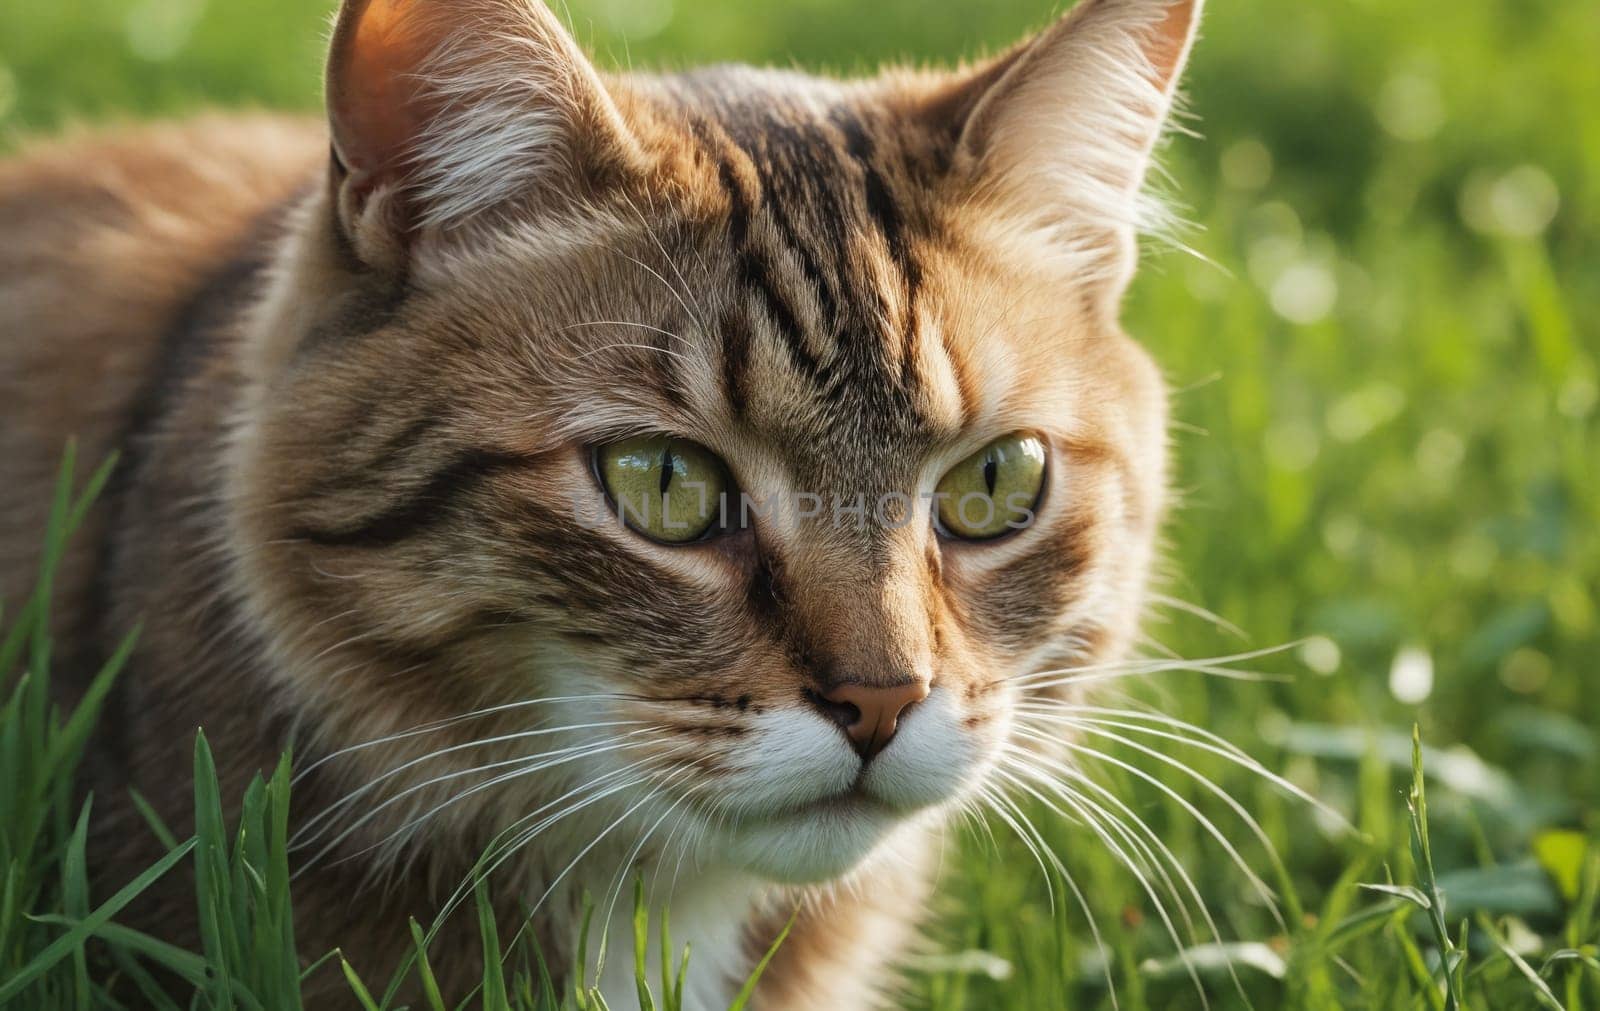 Closeup of a Felidae carnivore in grass, staring at the camera by Andre1ns